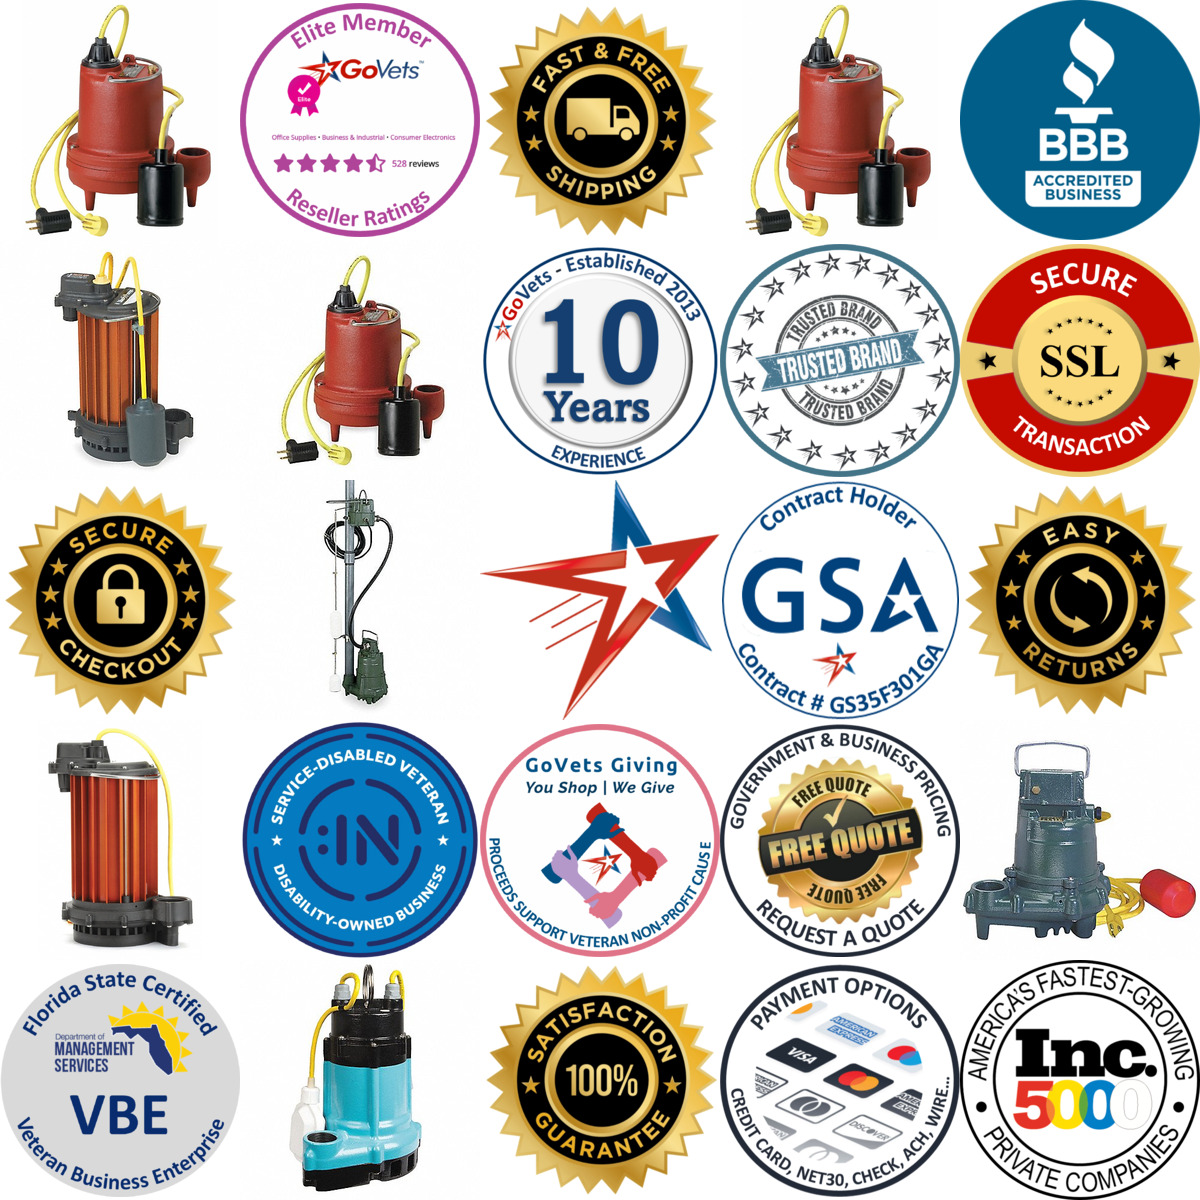 A selection of High Temperature Sump Pumps products on GoVets